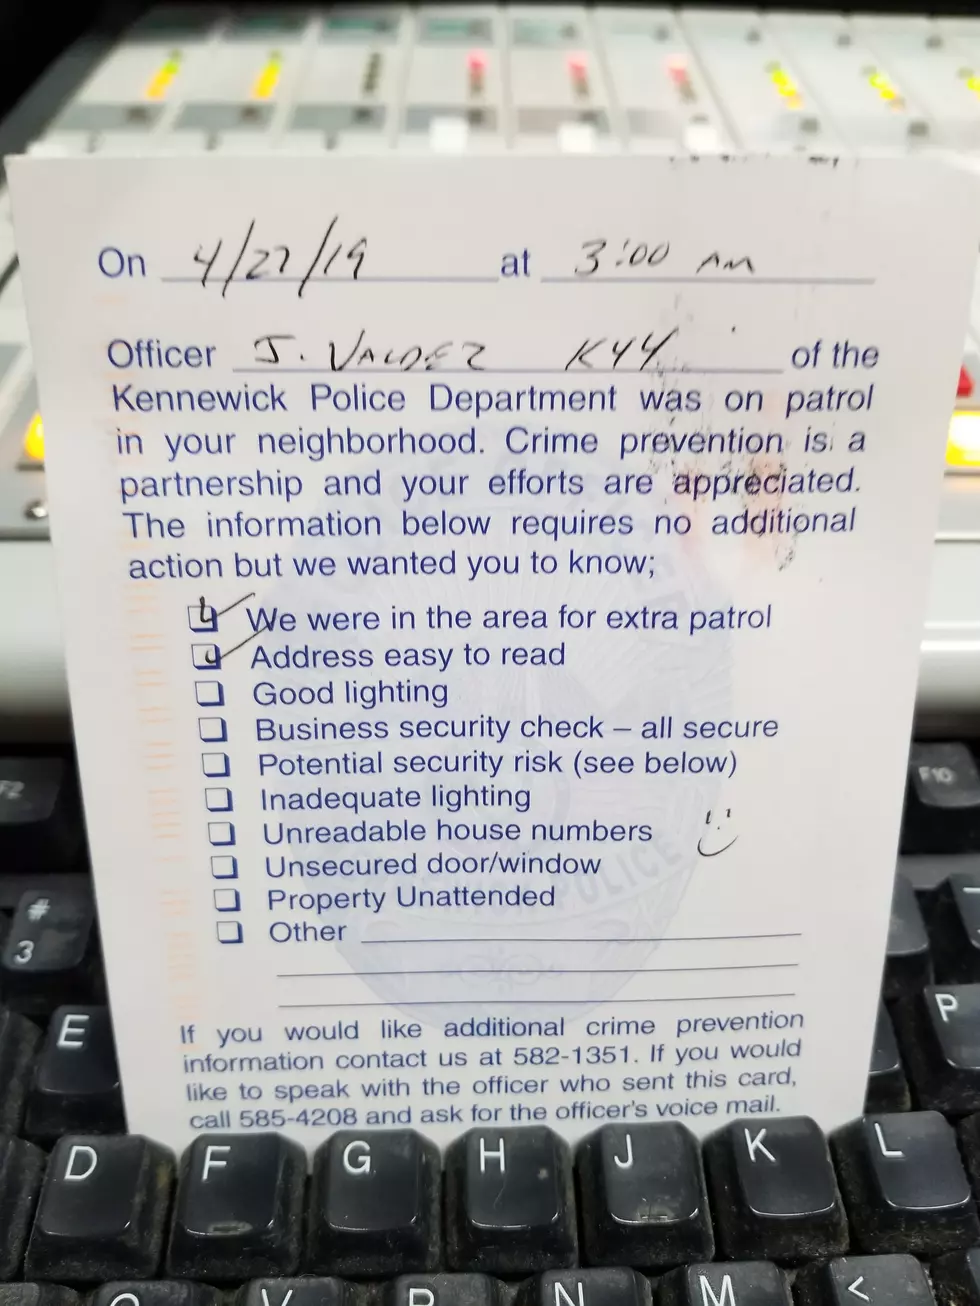 Anyone Else See These Notes From The Kennewick Police?